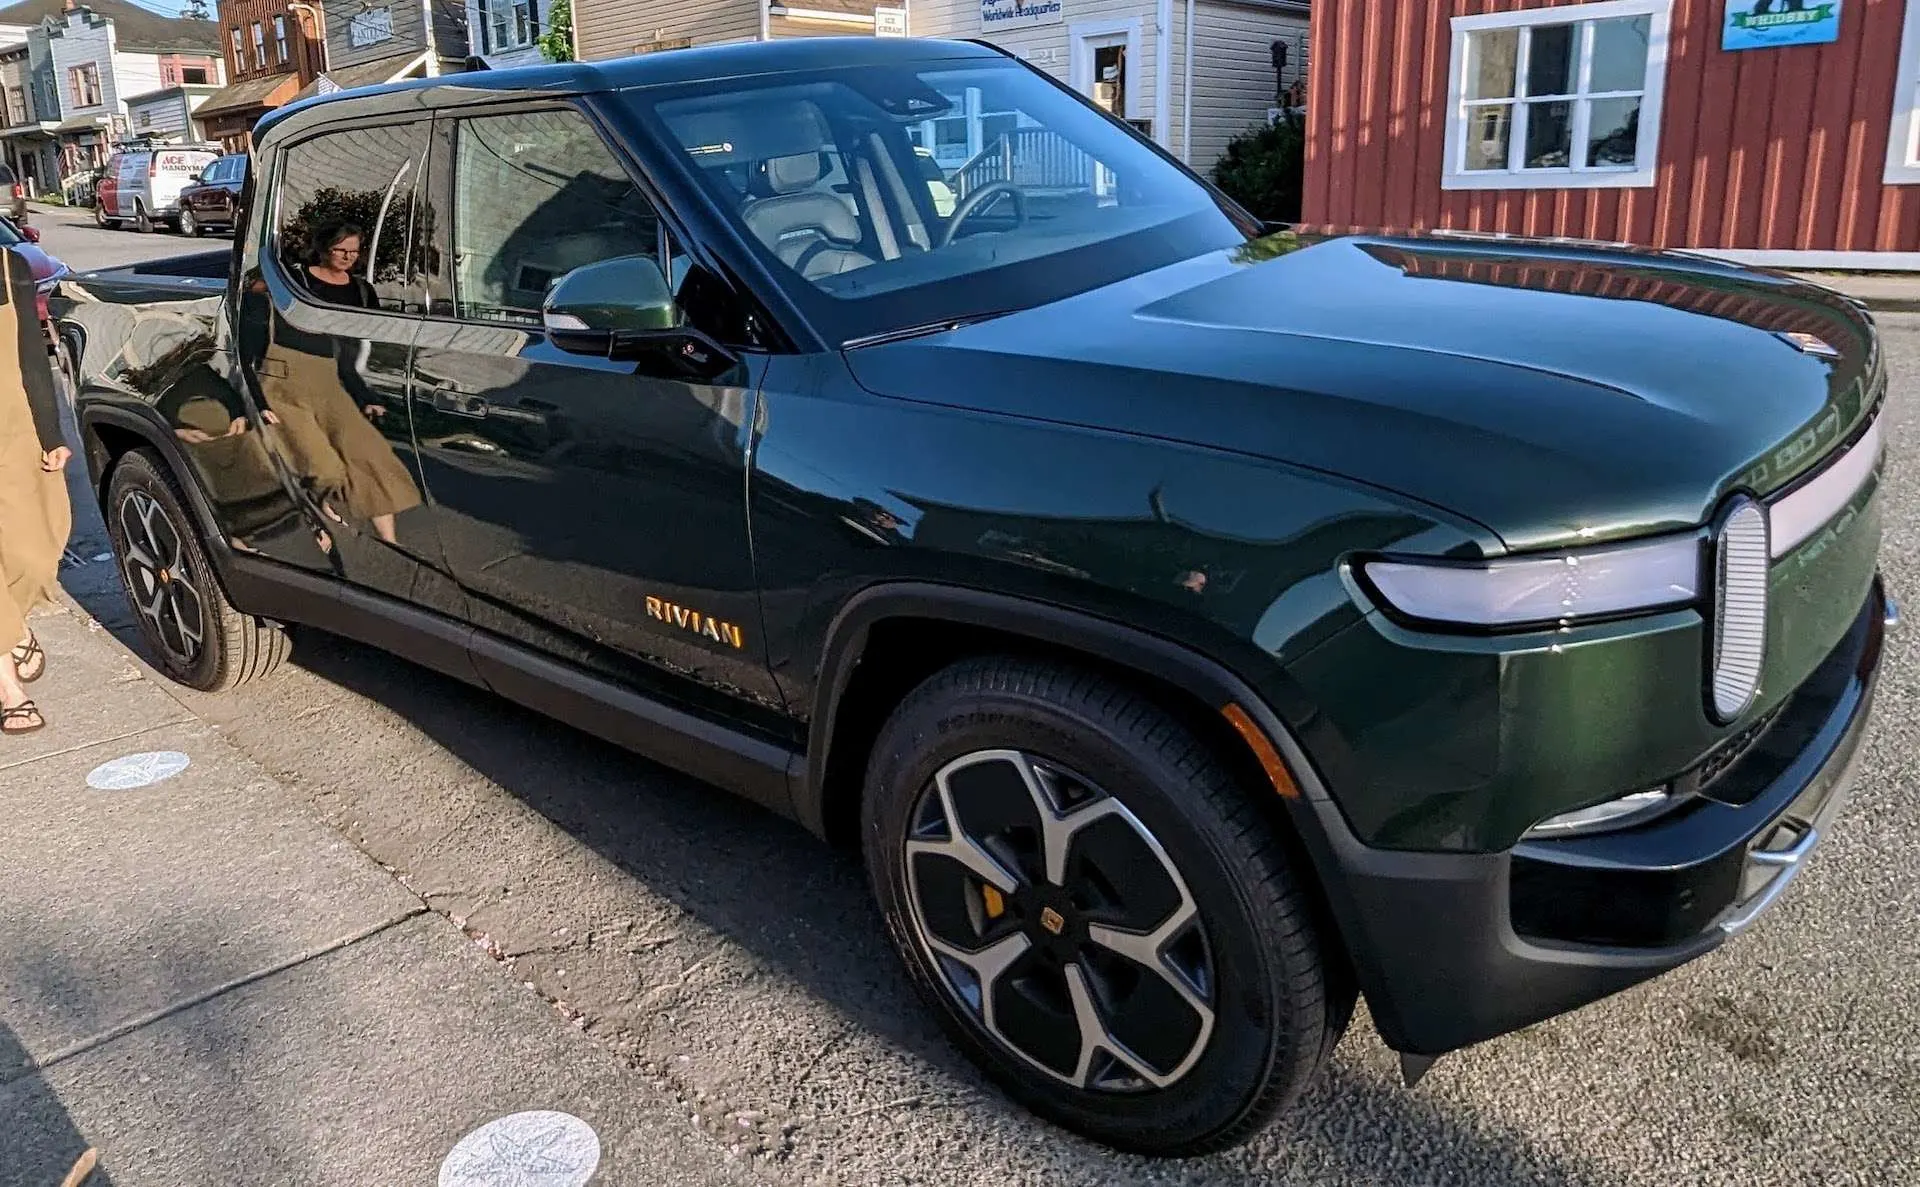 rivian truck parked downtown